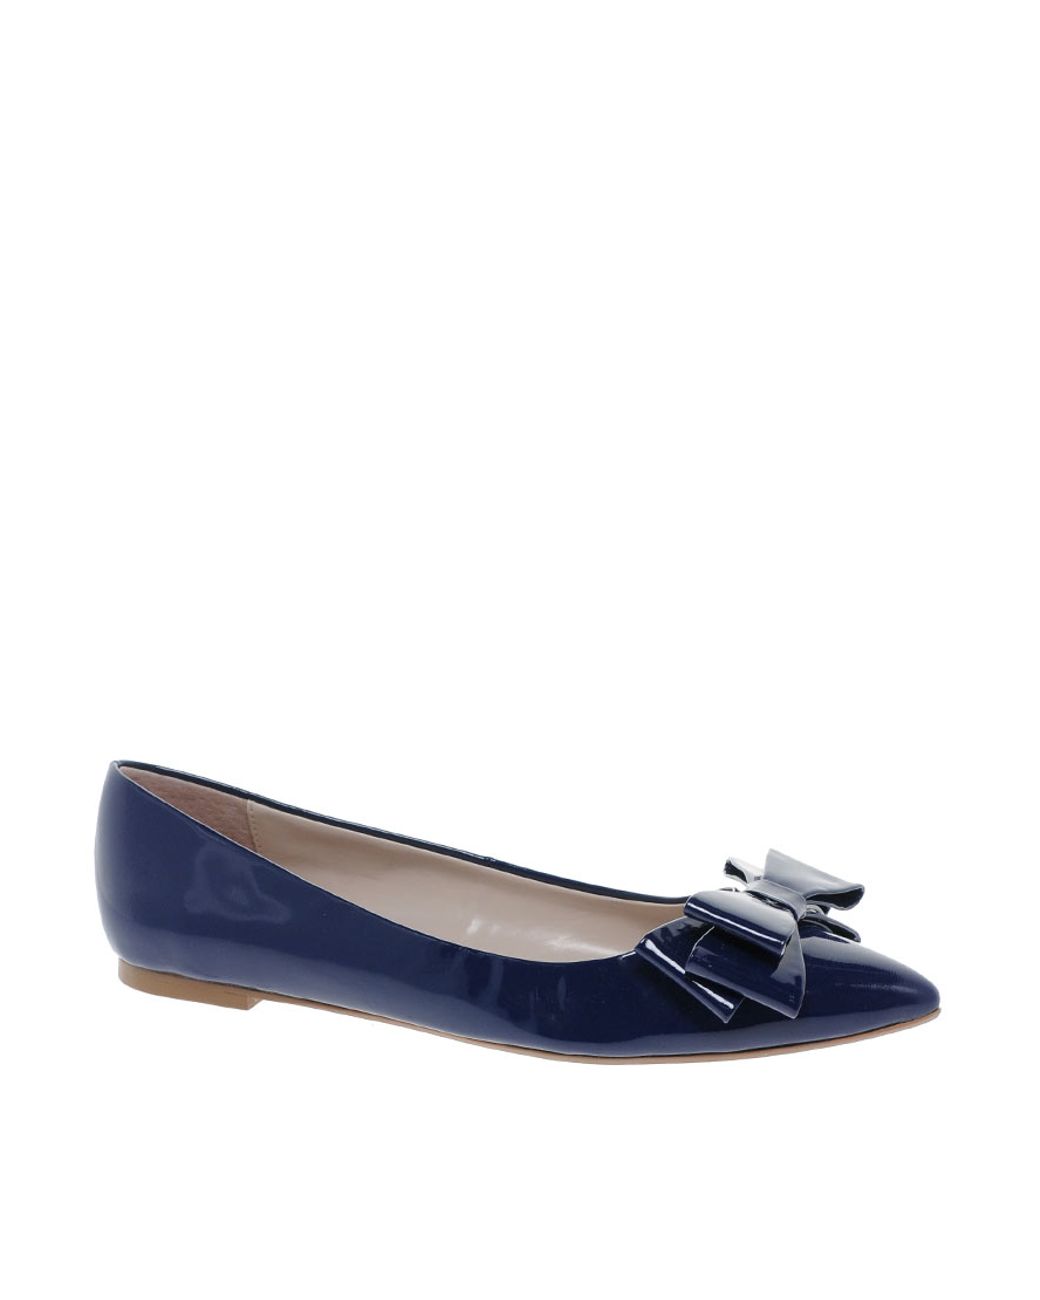 Dune Lavish Pointed Toe Bow Flats in Blue | Lyst